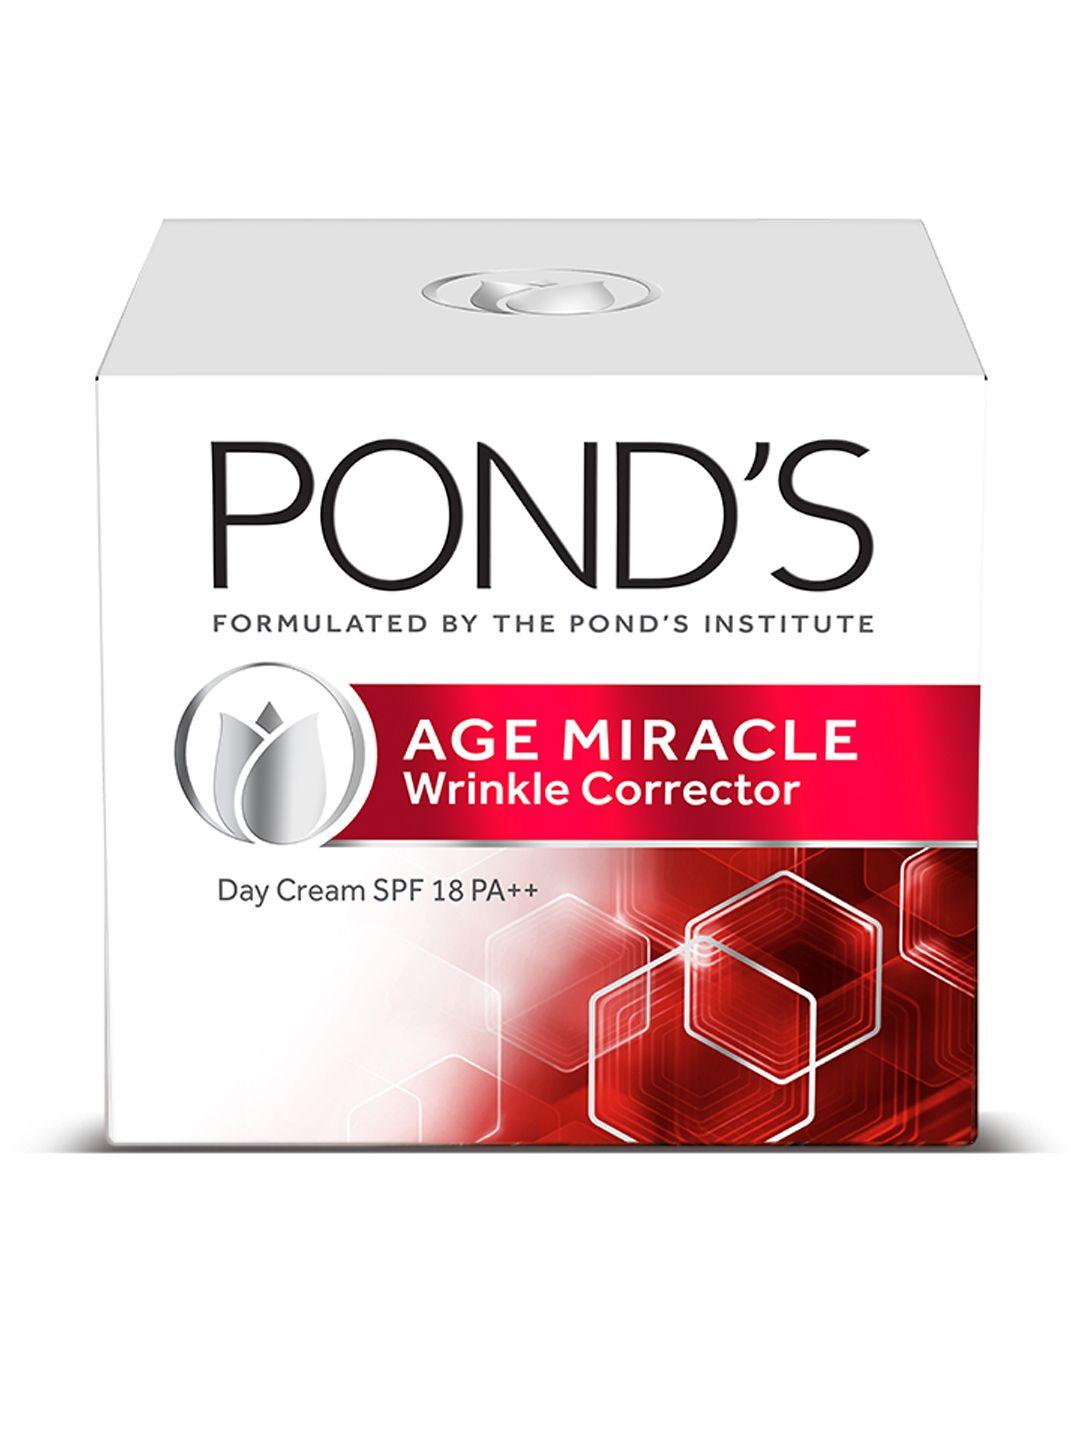 pond's age miracle wrinkle corrector day cream spf 18 pa++ 20g